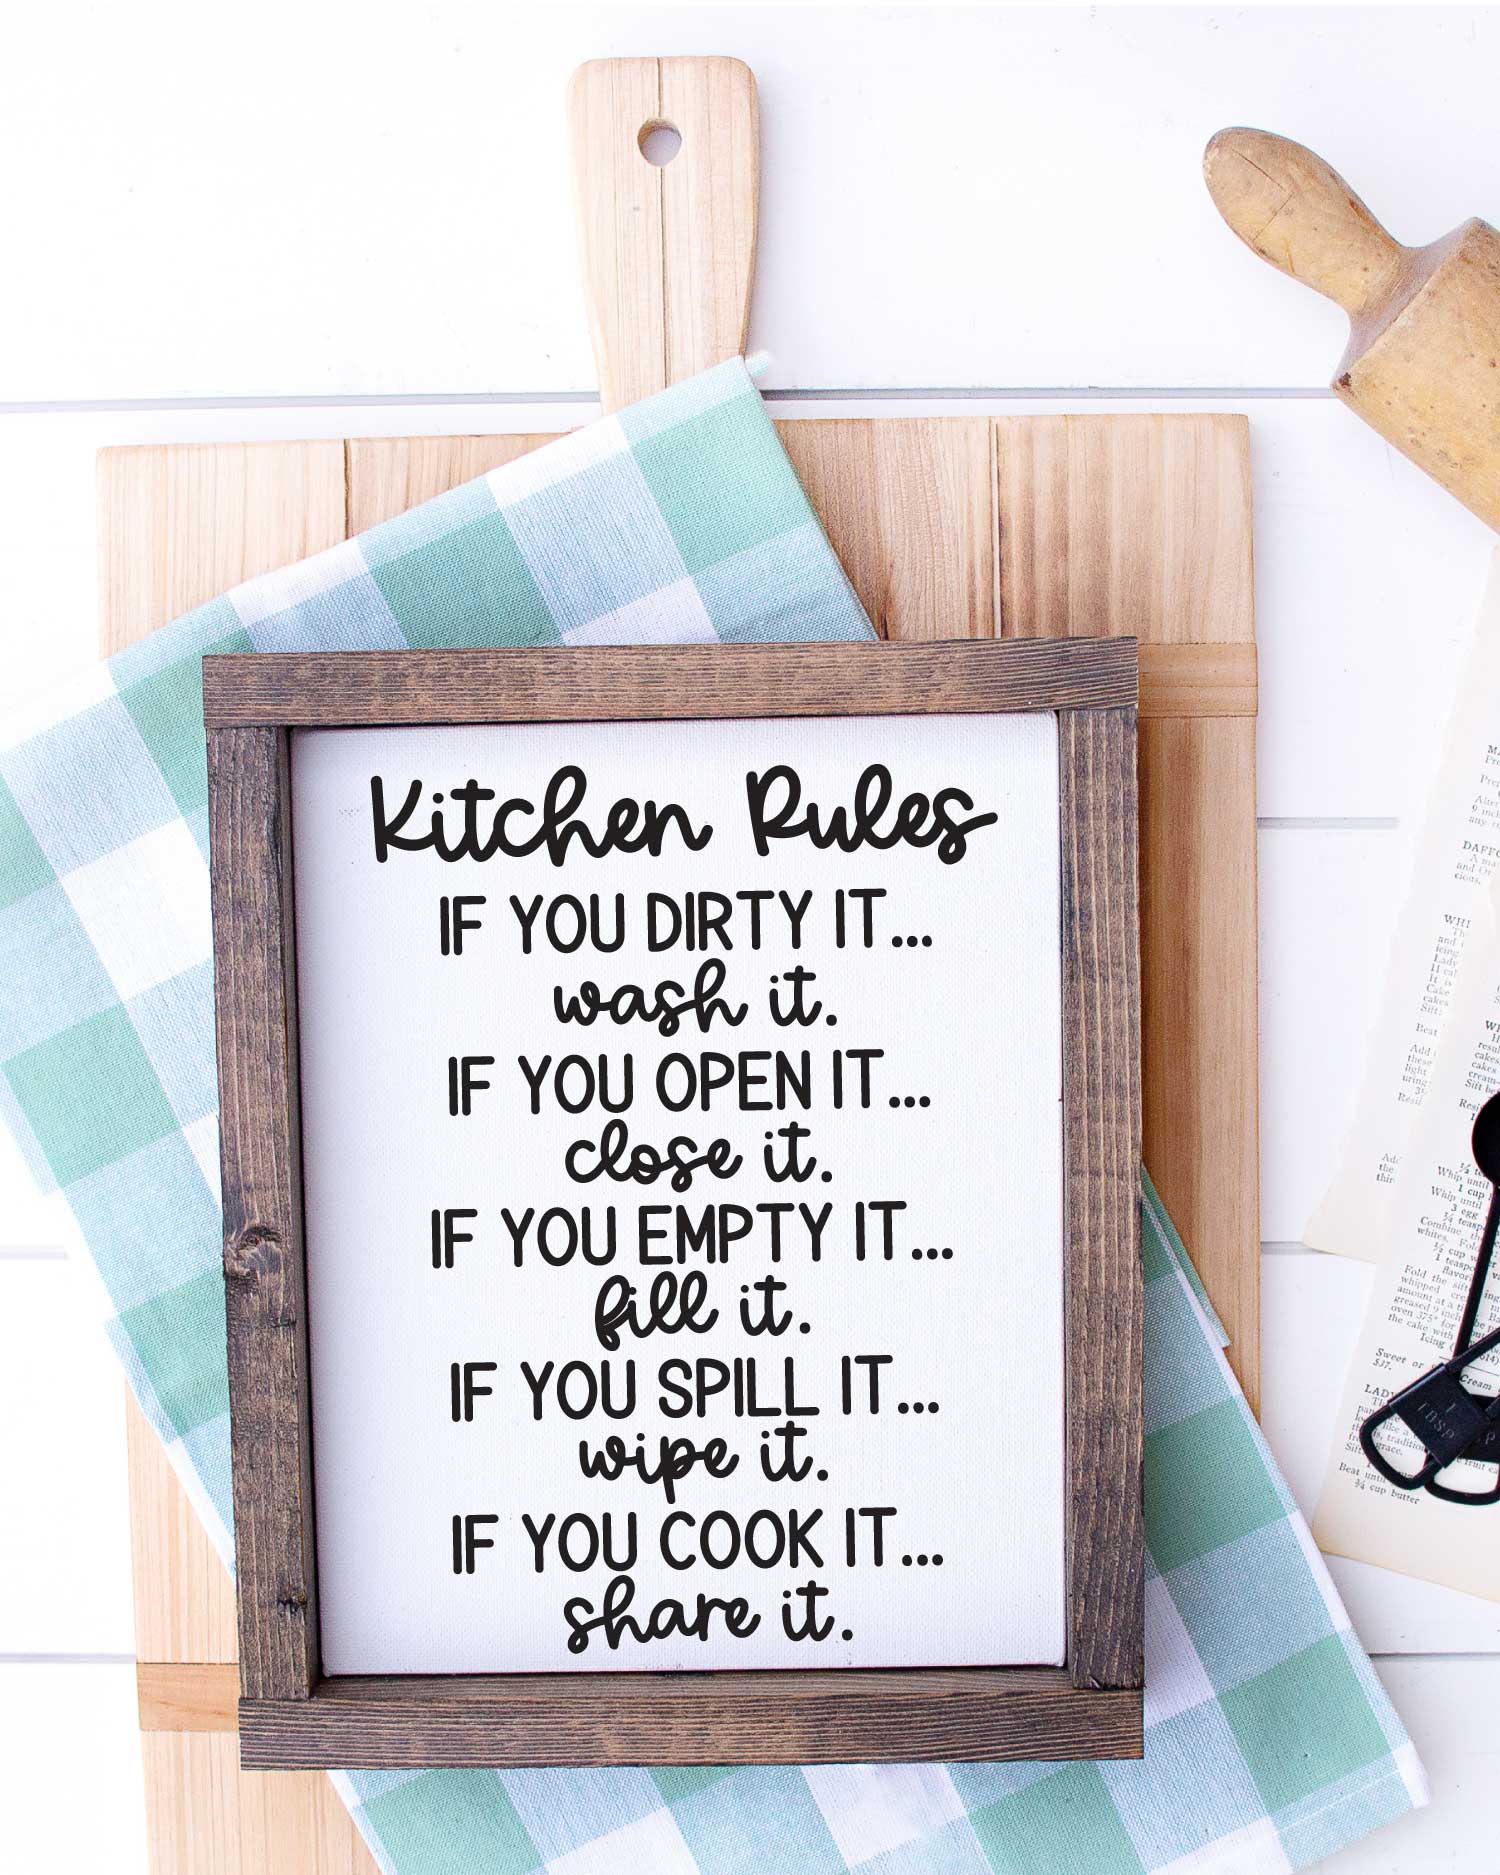 White wood with Cutting Board, kitchen towel, rolling pin and sign that has kitchen rules svg applied